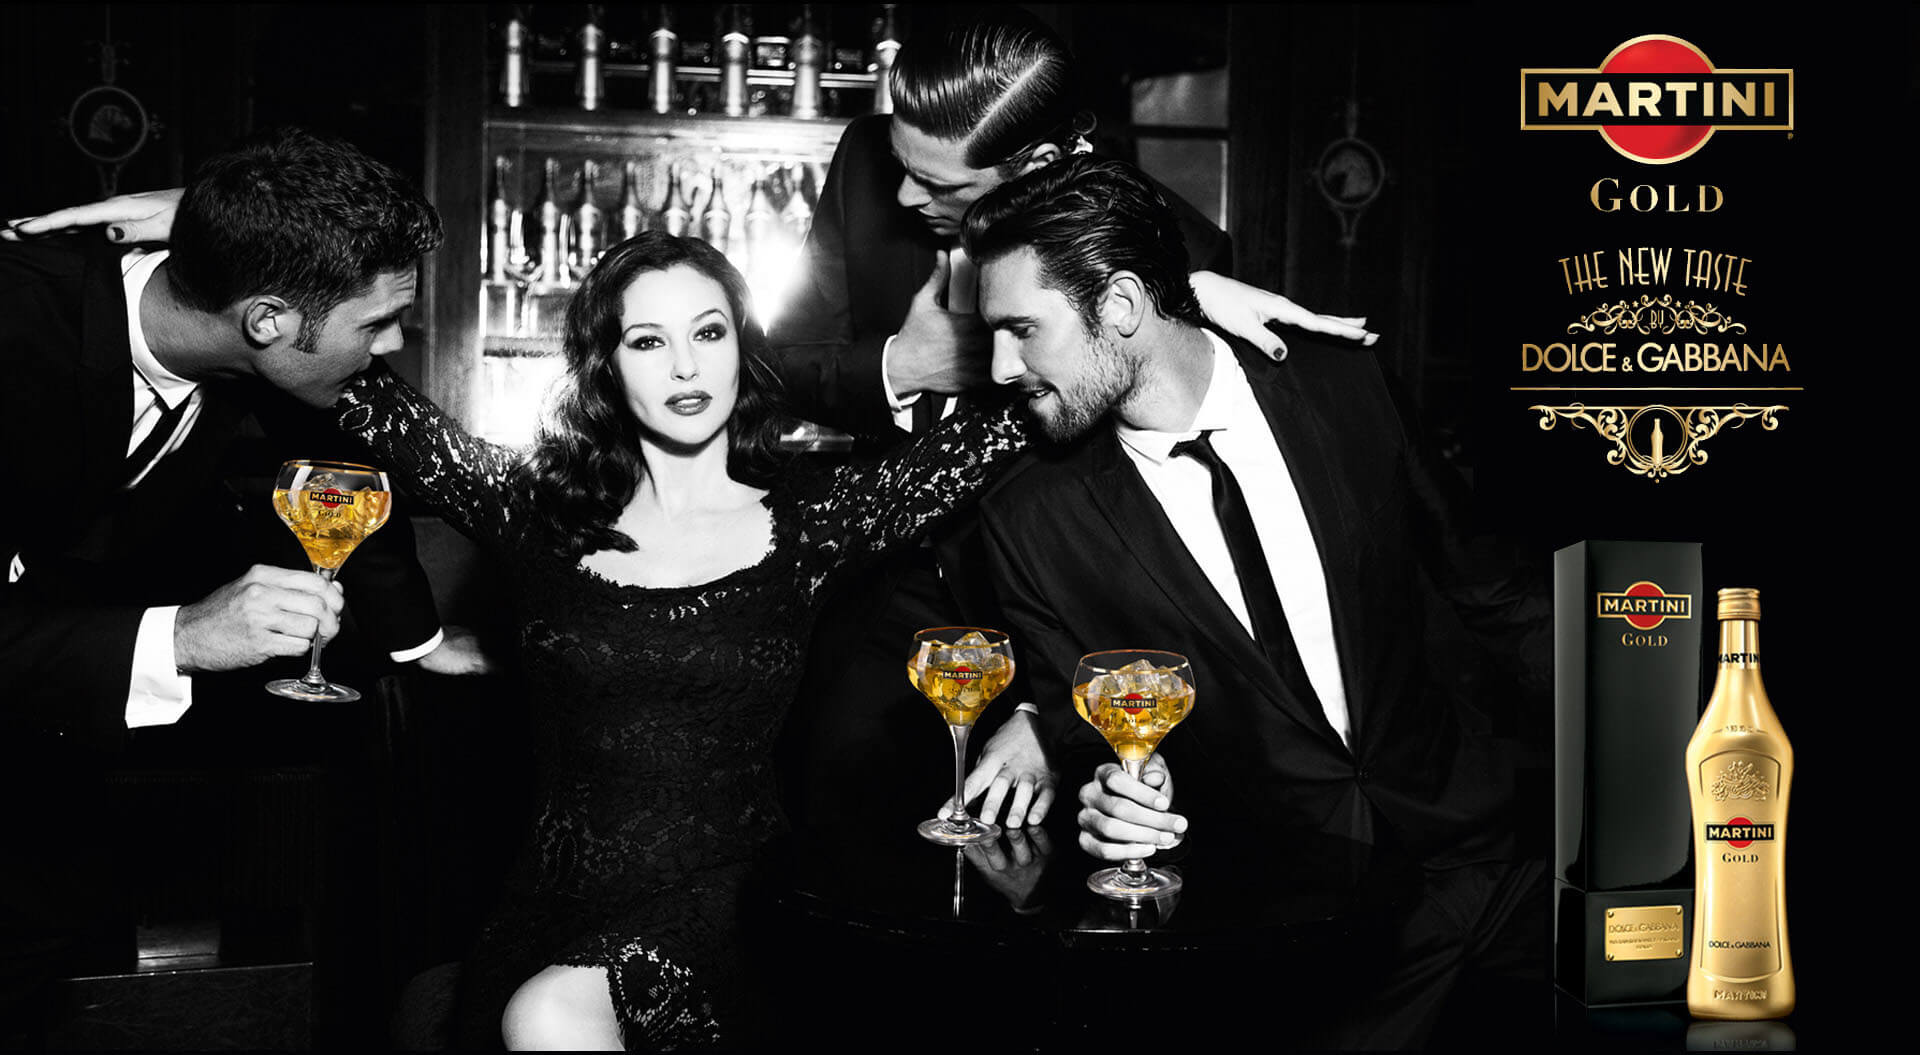 Martini Gold the new taste Dolce & Gabbana brand marketing with Monica Bellucci for Bacardi Global Travel Retail